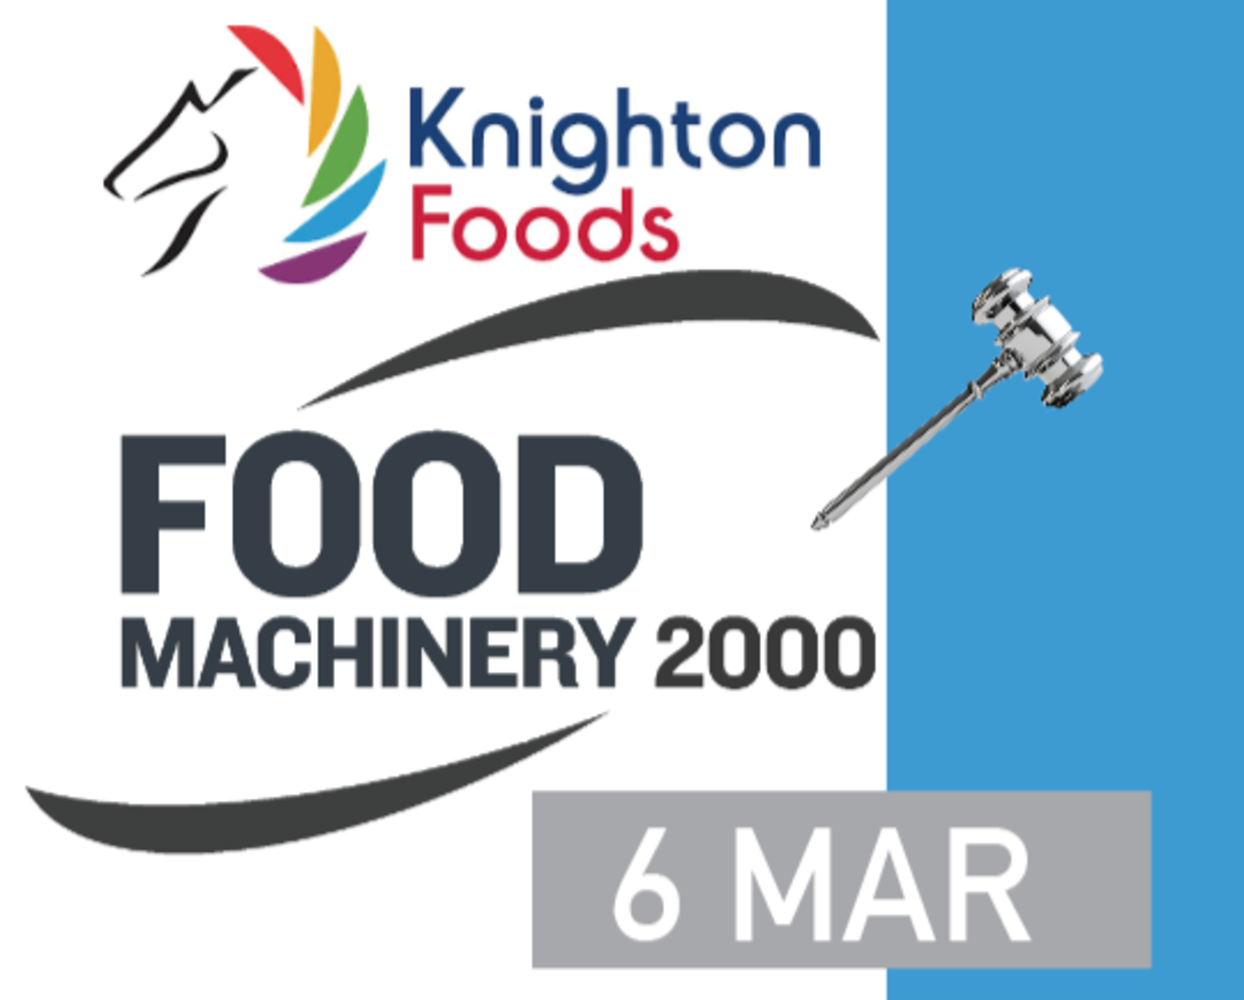 DUE TO THE CLOSURE OF KNIGHTON FOODS - 600 LOTS (VIEWING 28 FEB - BY APPT ONLY - CALL NOW TO BOOK IN 01373 831 373)